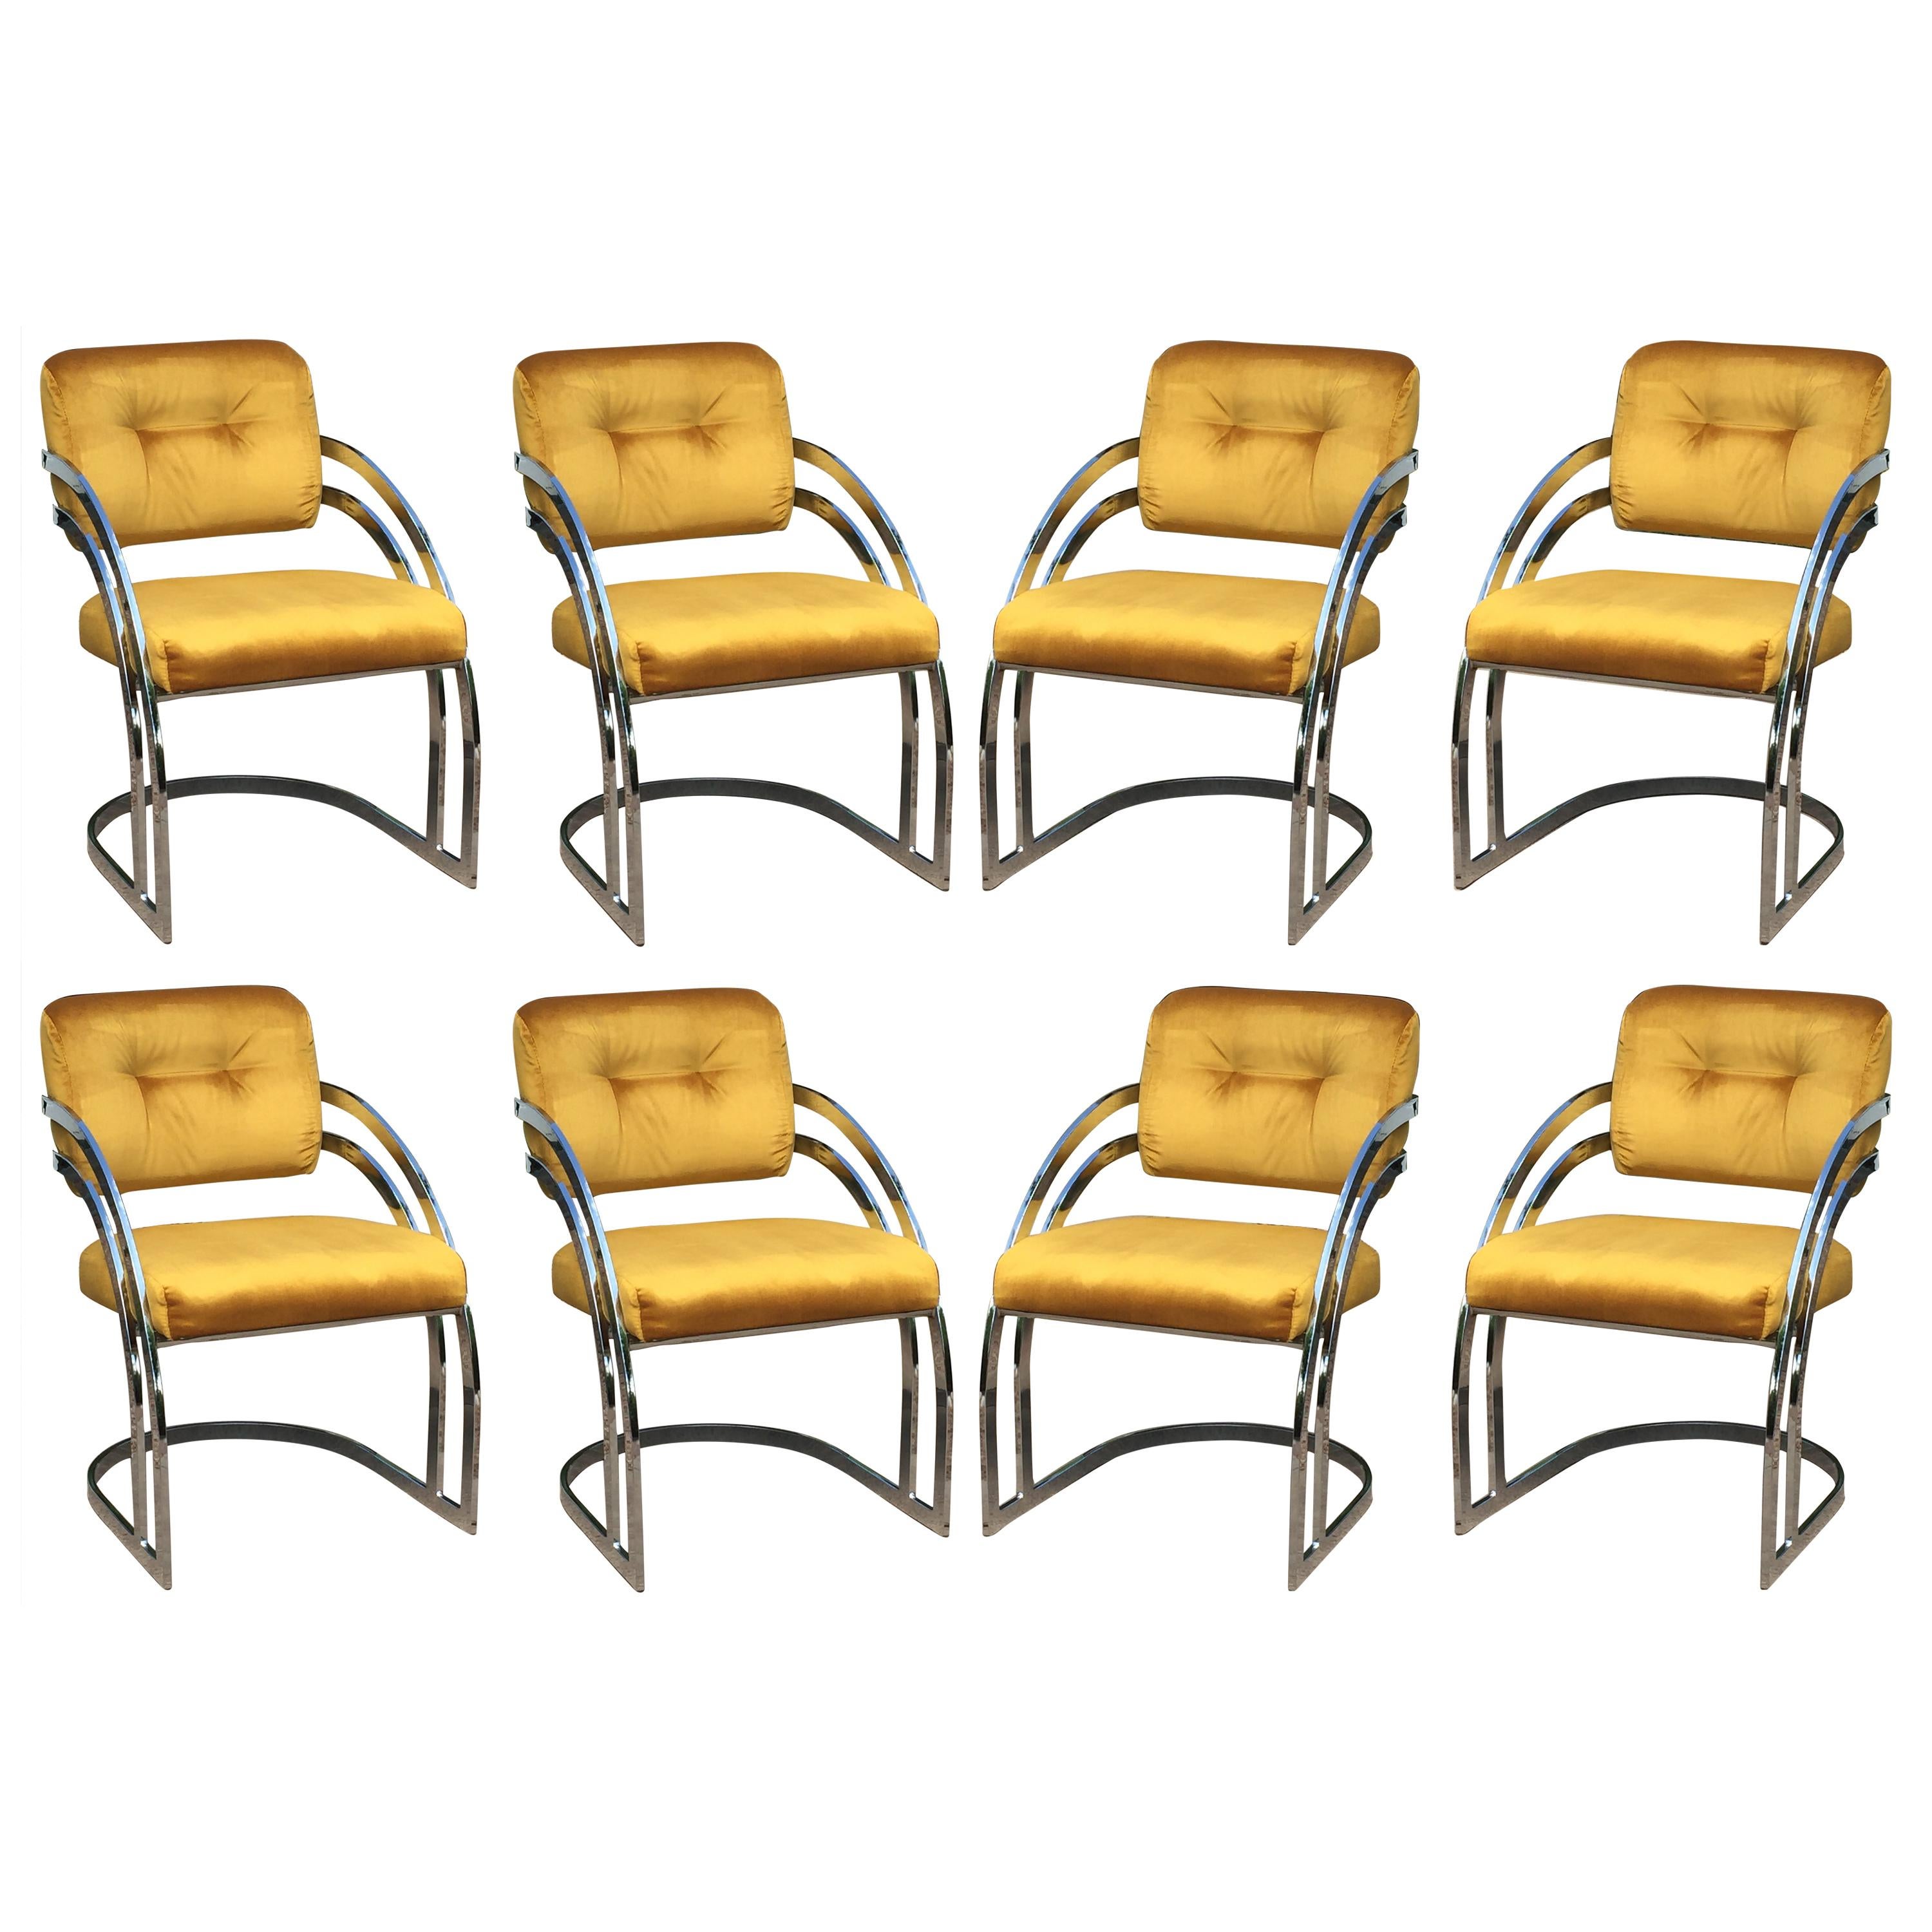 Milo Baughman Style Chrome Dining Chairs, Set of 8